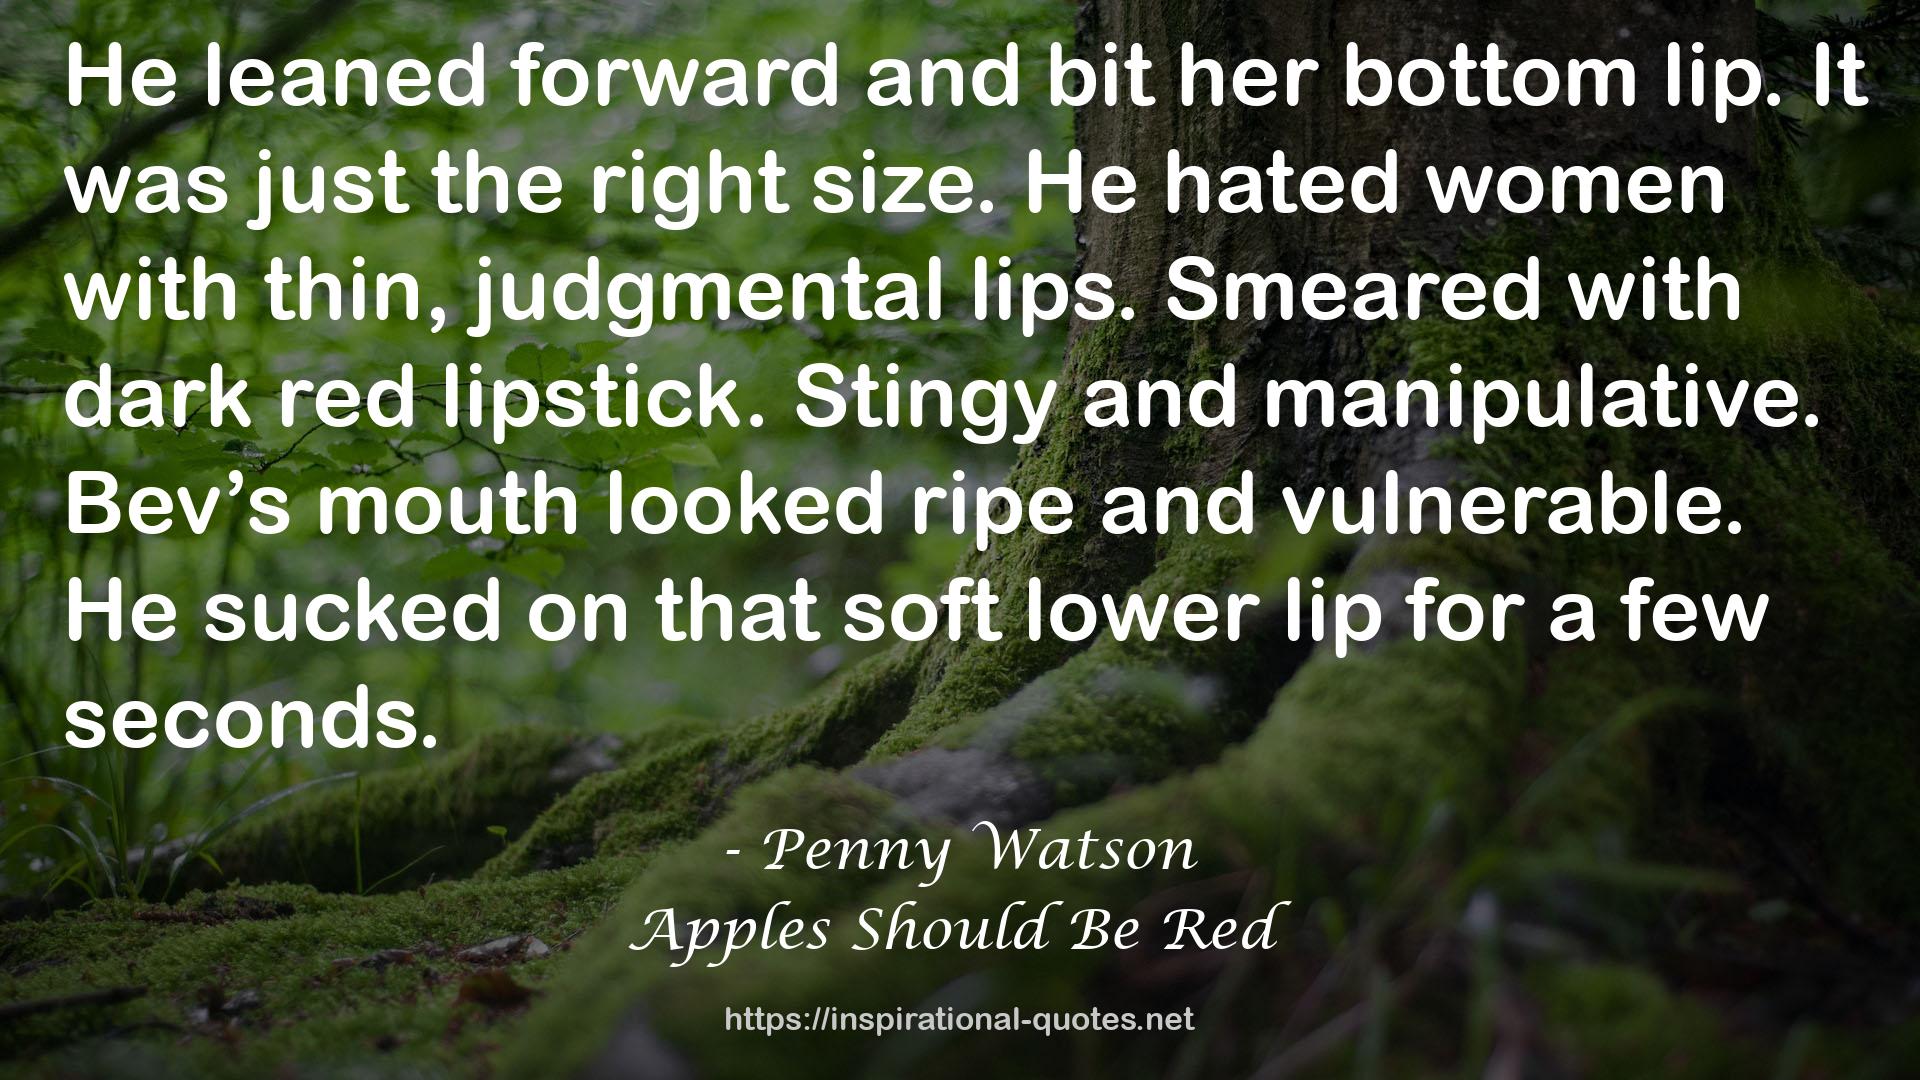 Penny Watson QUOTES